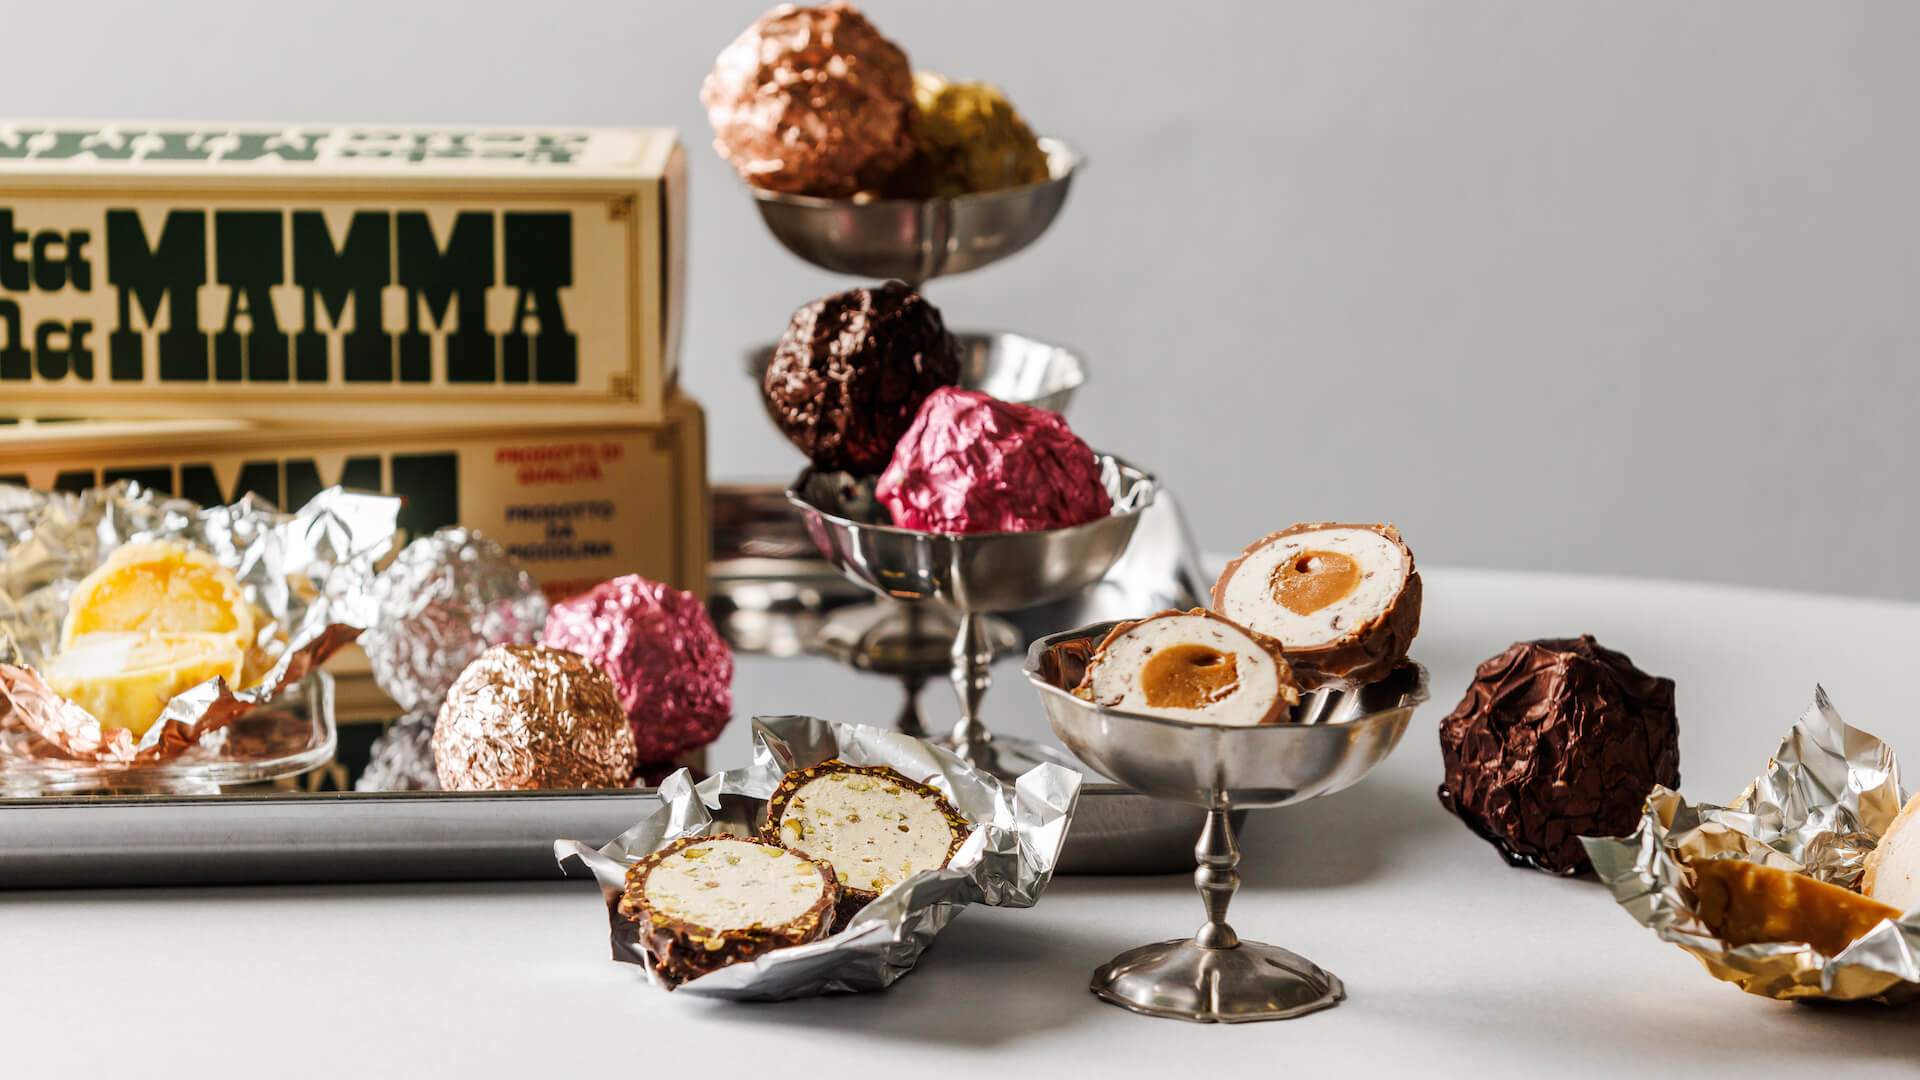 You Can Give Mum a Taste of La Dolce Vita This Mother's Day with Piccolina's Gelato-Filled Bonbons